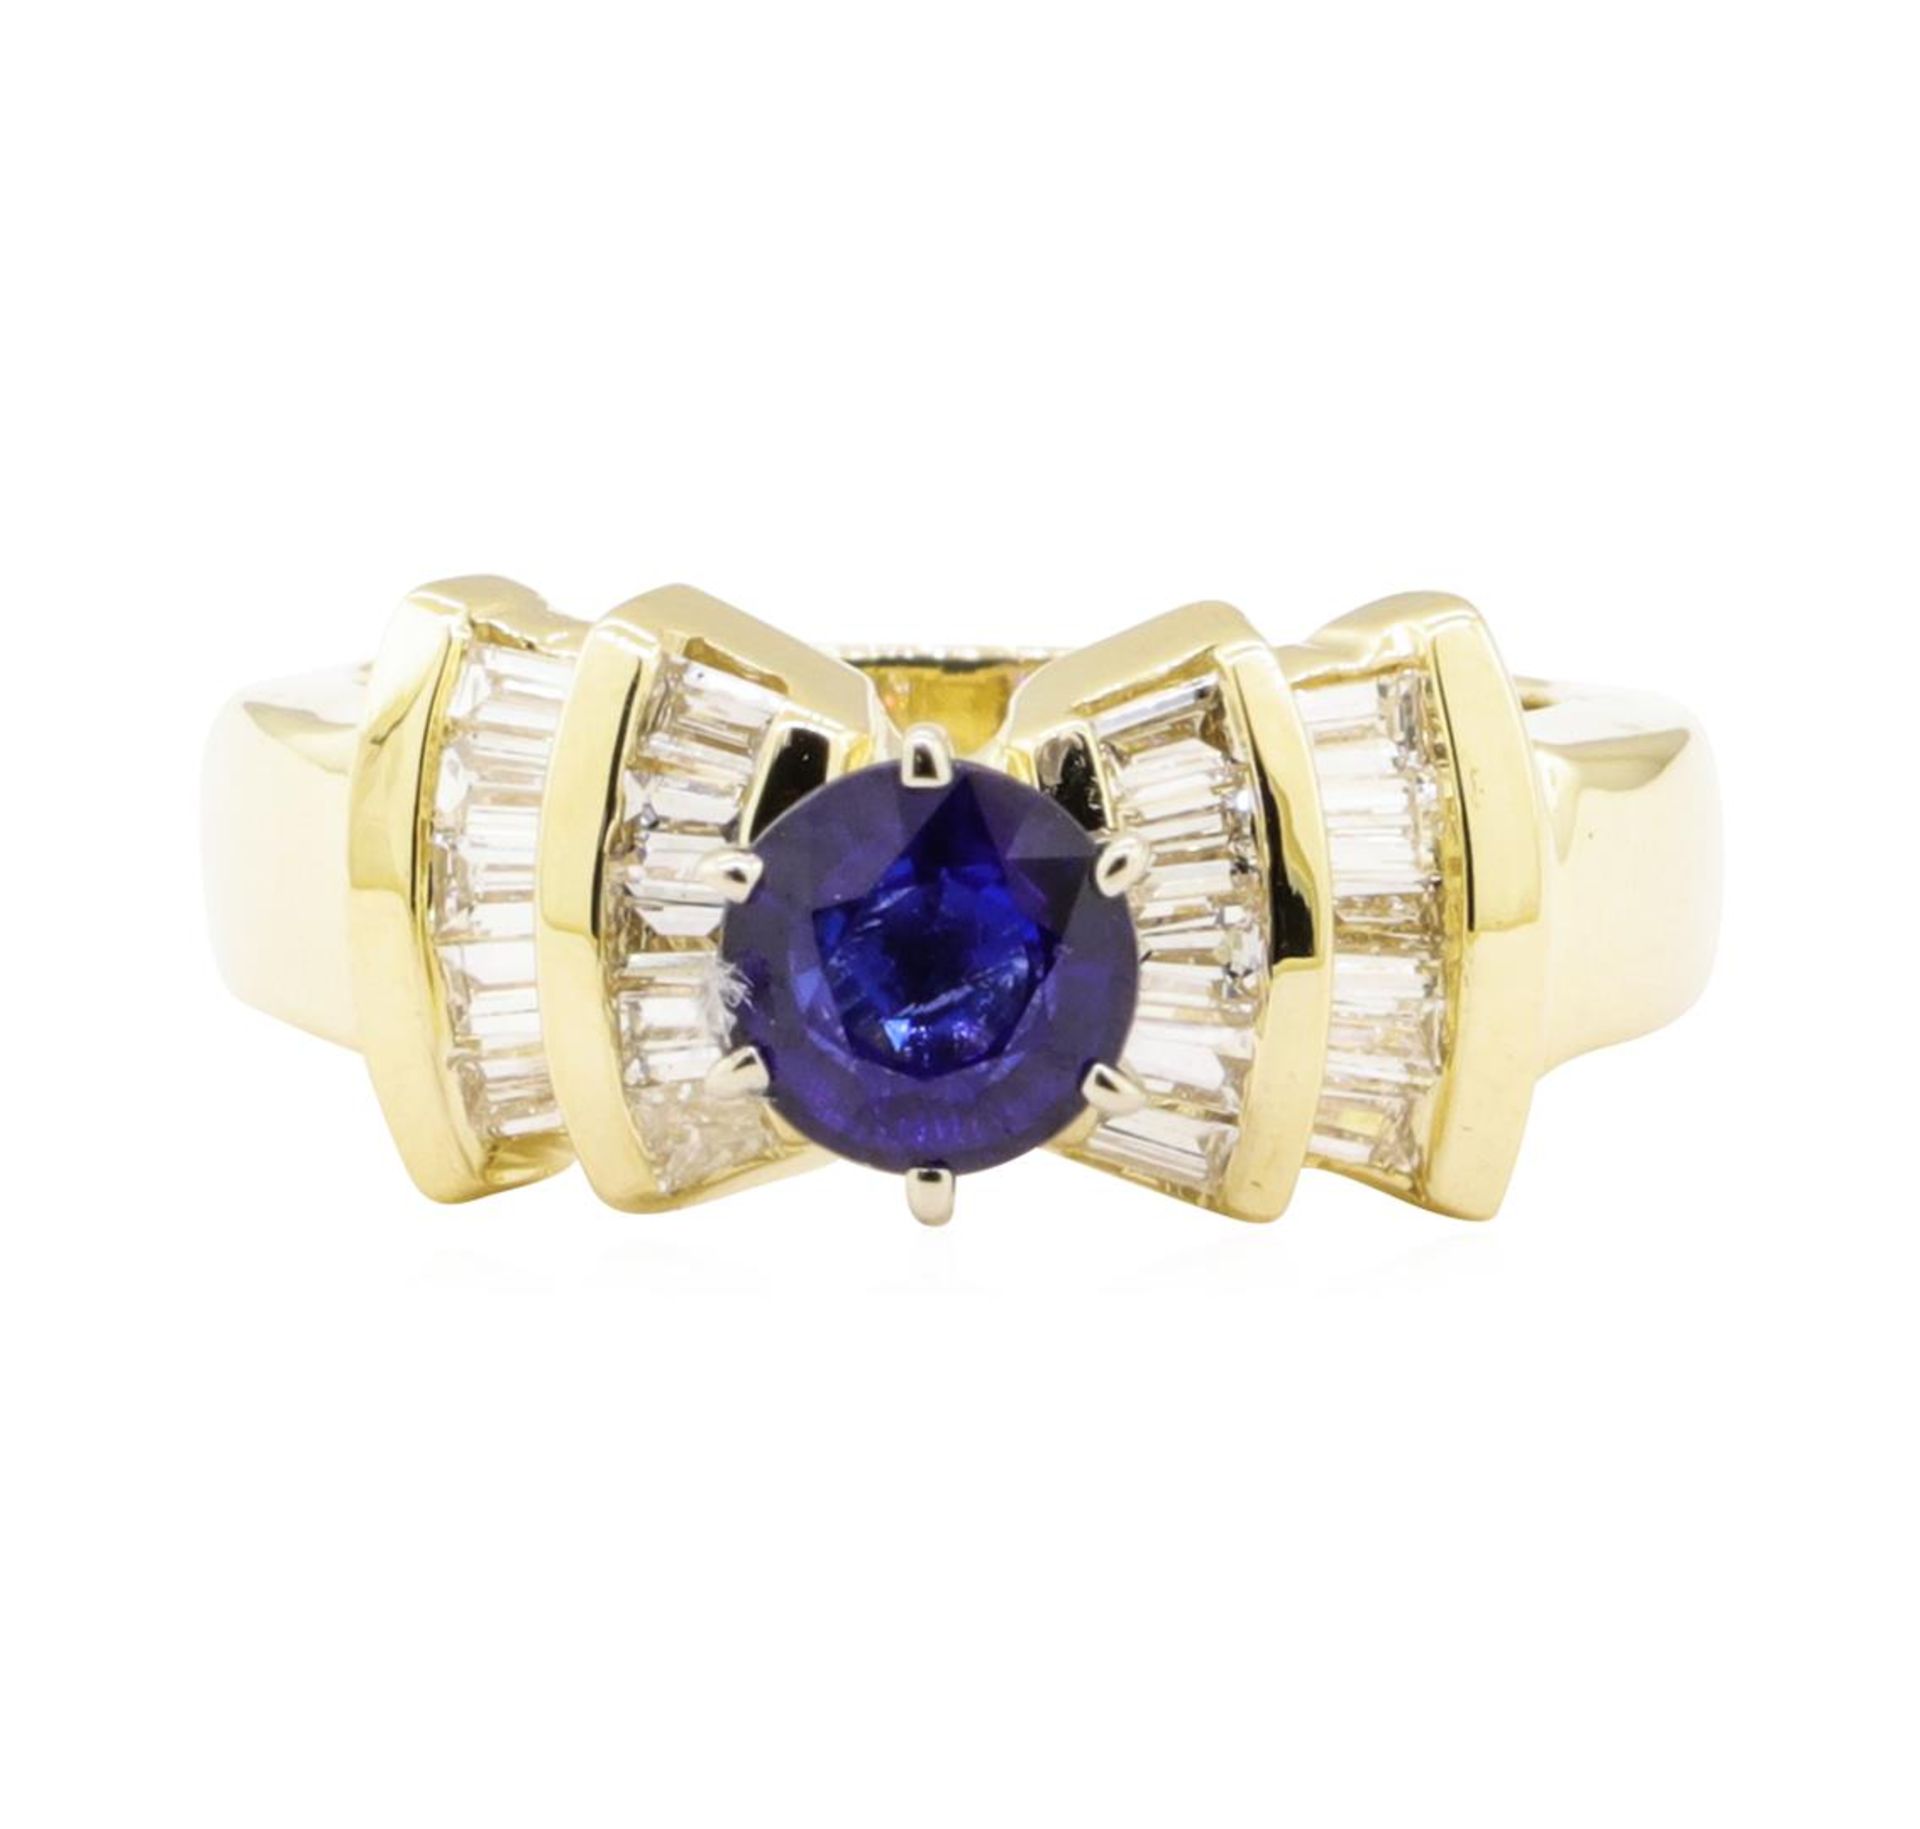 1.66 ctw Blue Sapphire And Diamond Ring - 14KT Yellow Gold - Image 2 of 5